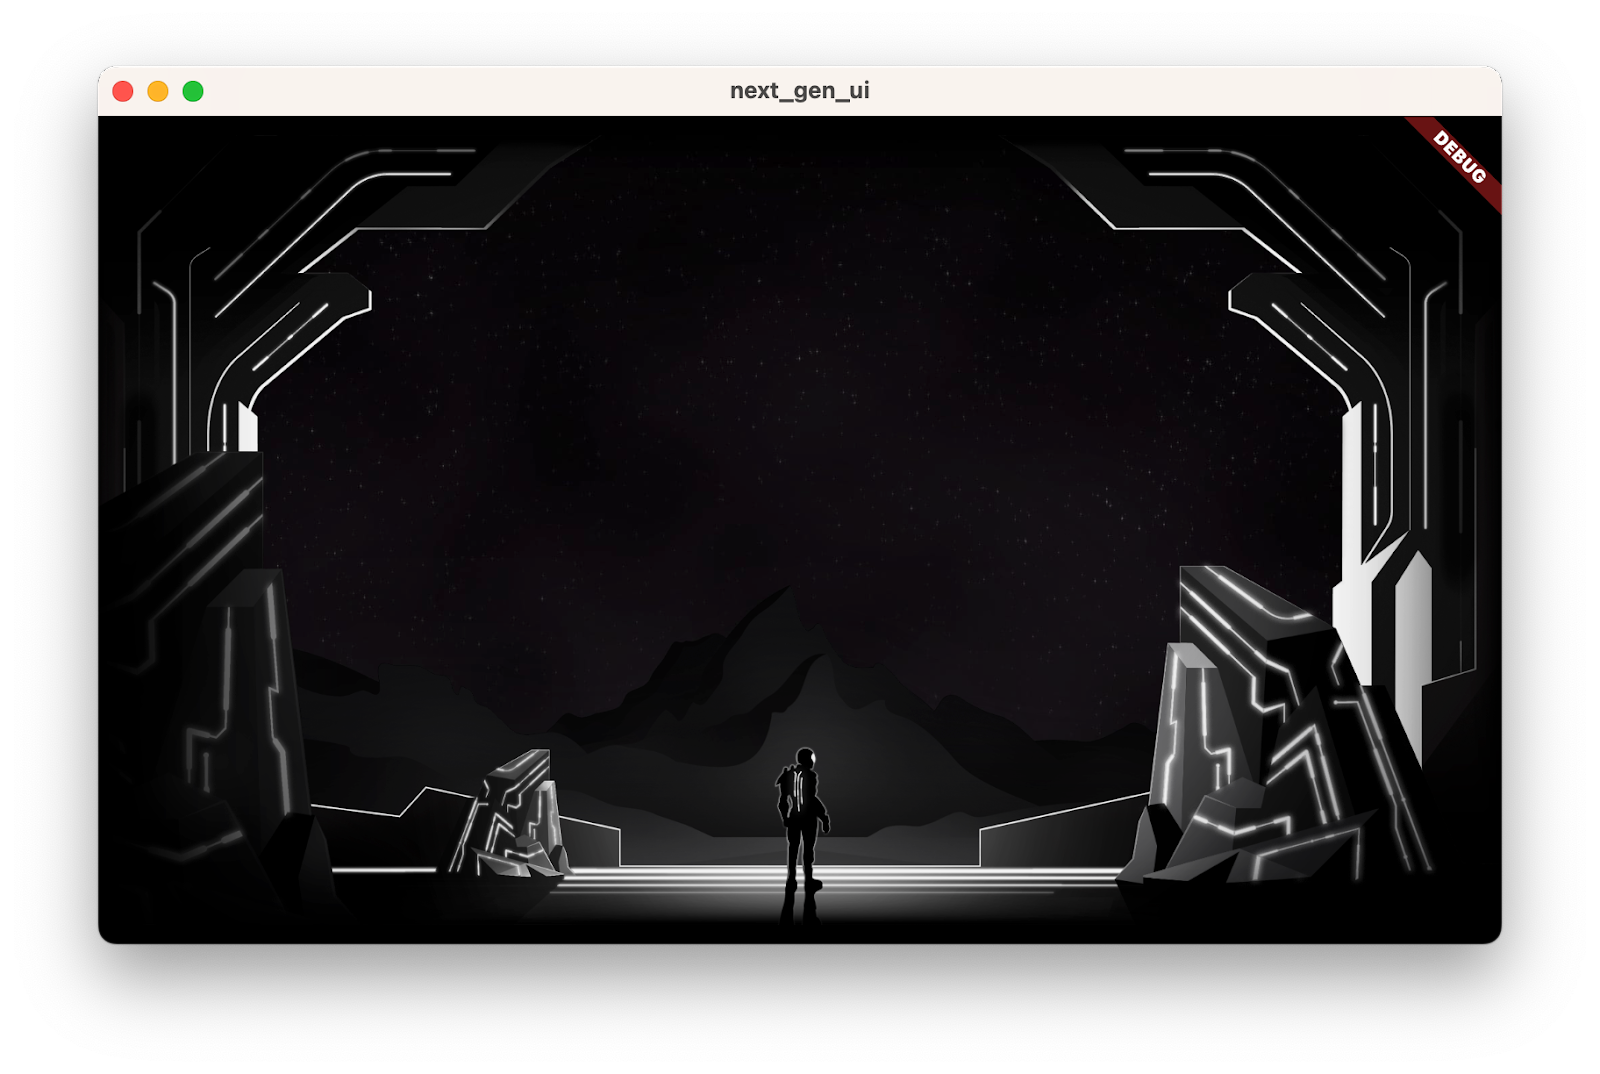 The codelab app running with just the background, midground and foreground art assets, displayed in monochrome